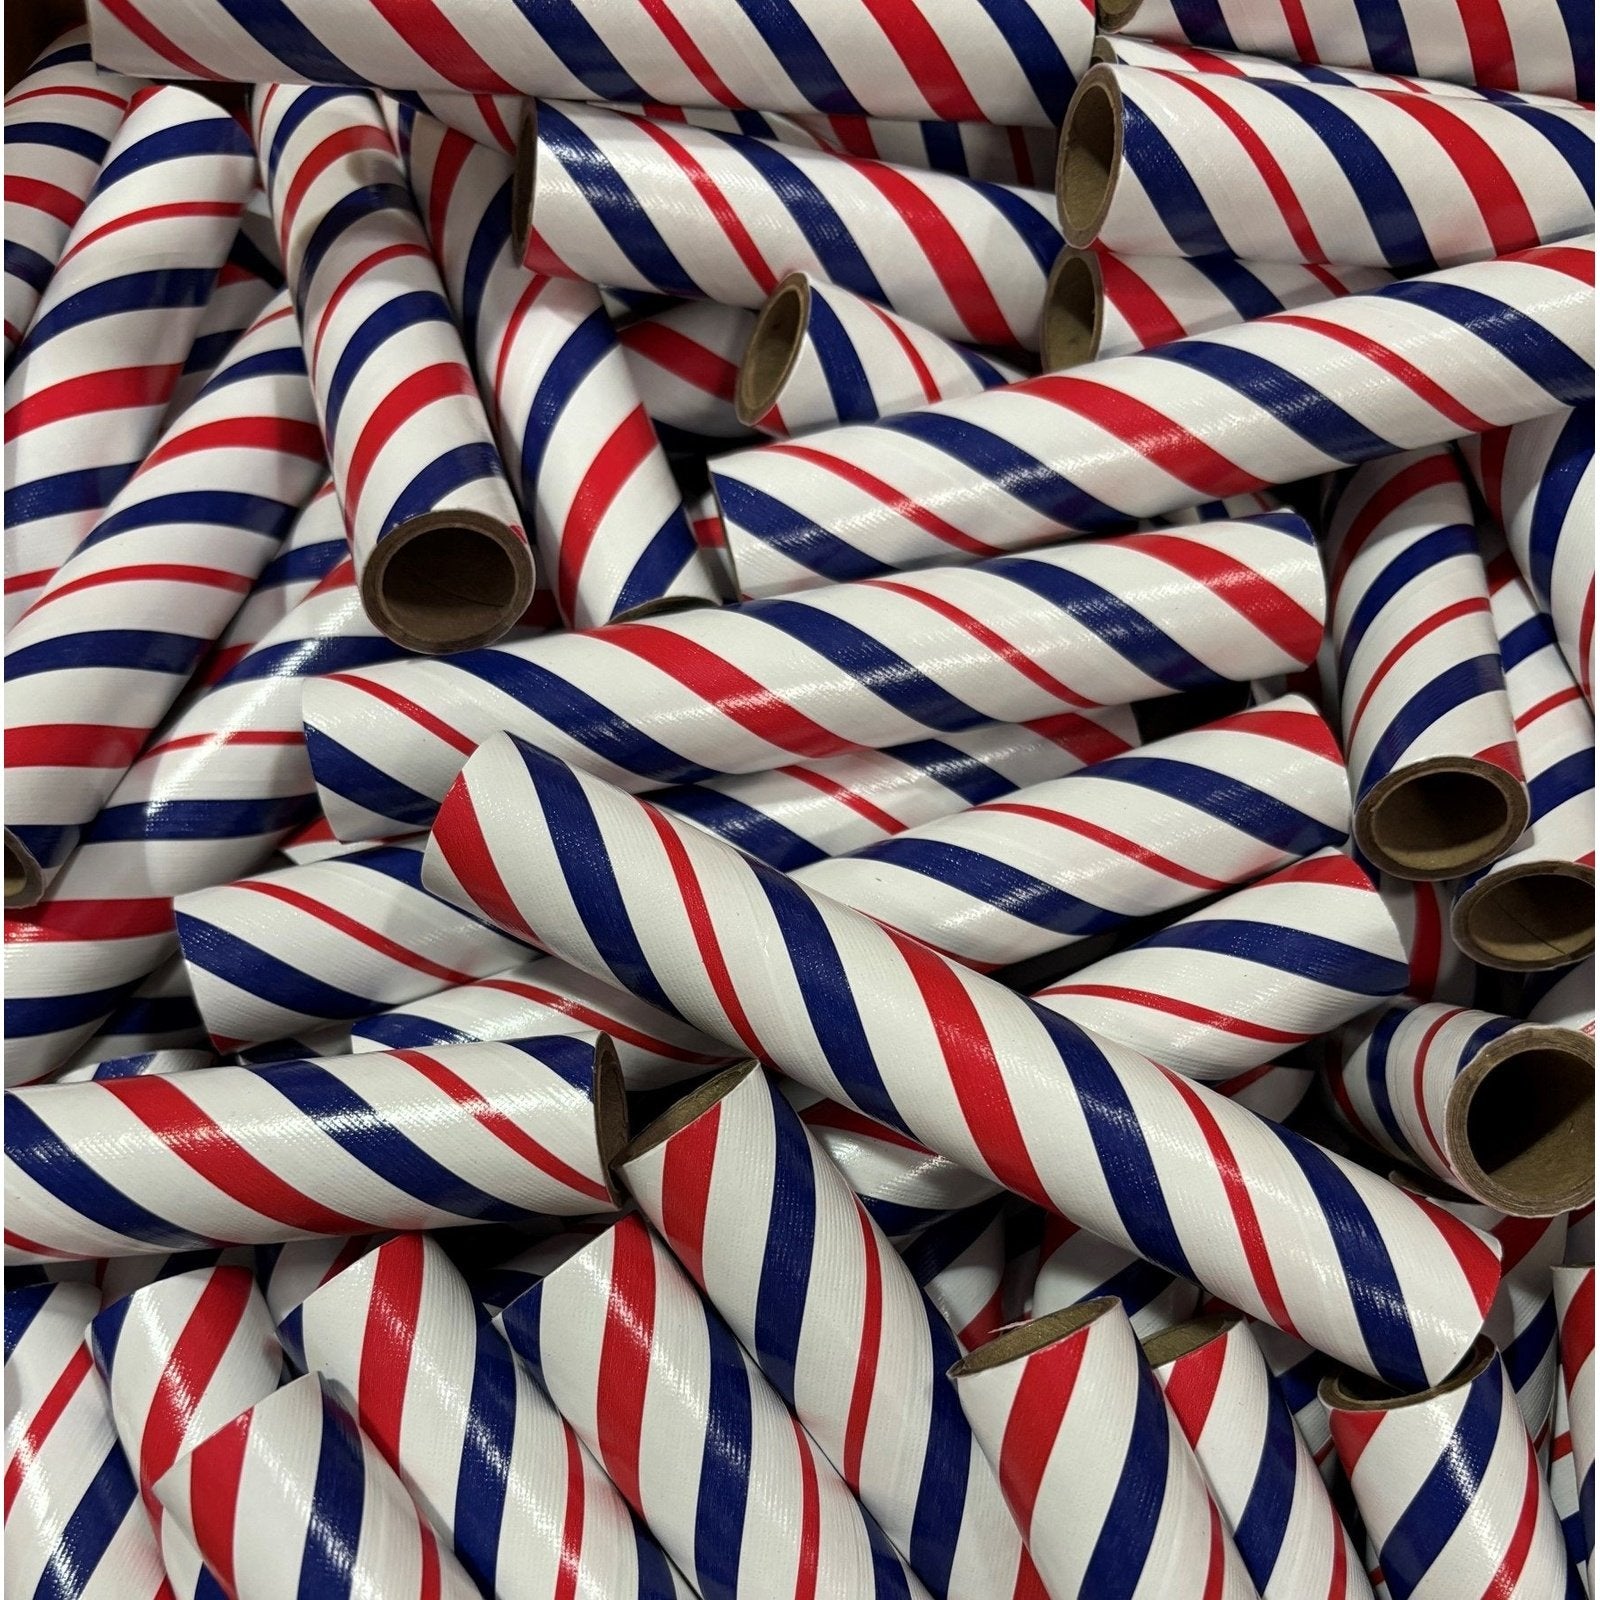 25pc 3/4" id - 6" long - 3/32" wall Red White Blue Striped Tube